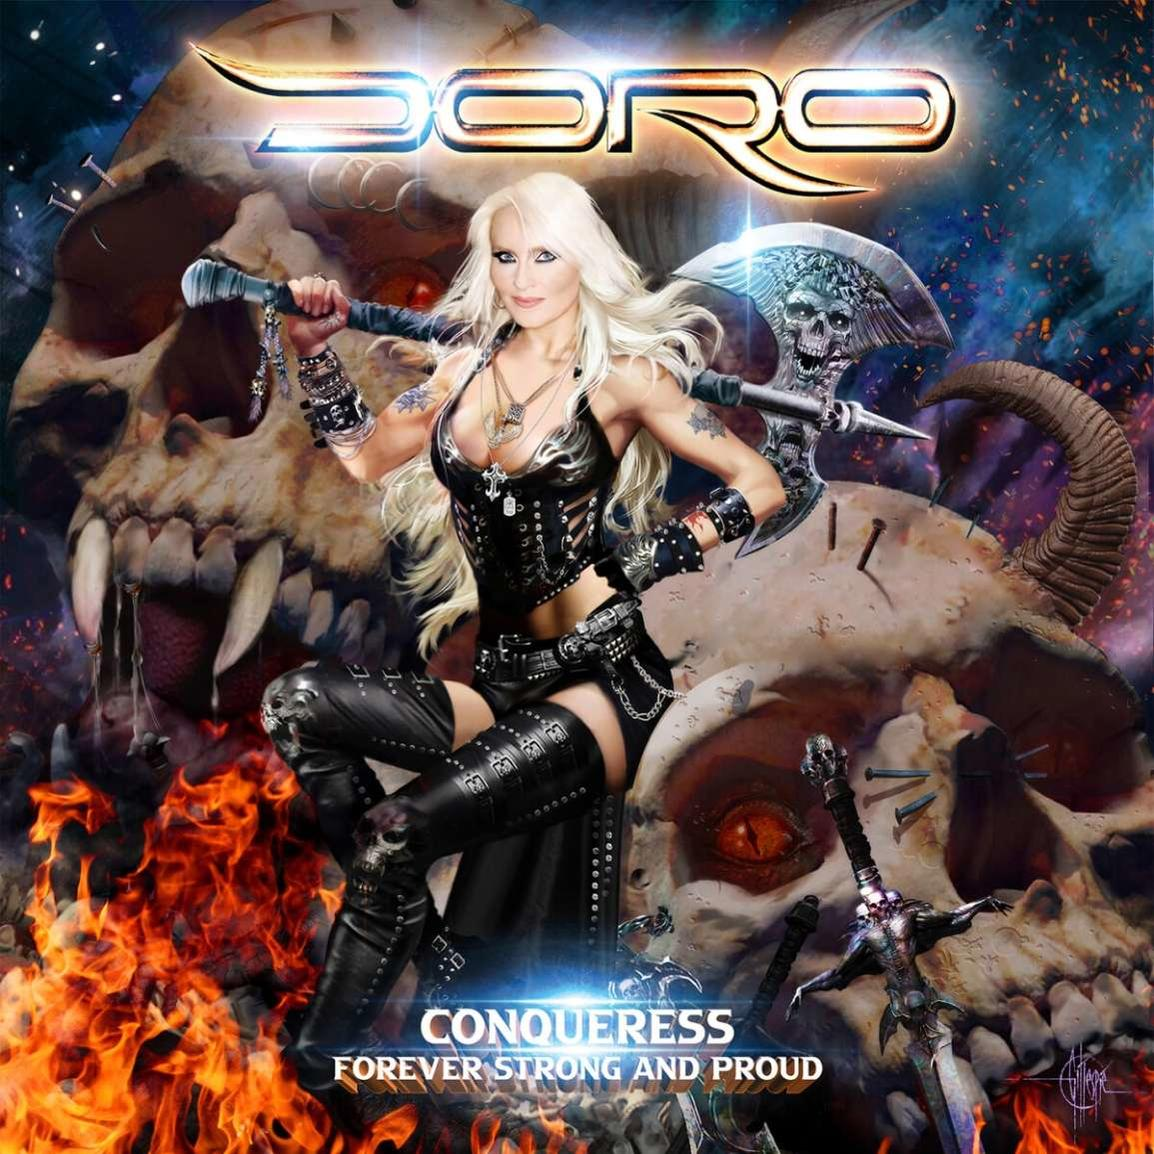 Conqueress Strong Proud - and (Vinyl) - - Forever Doro